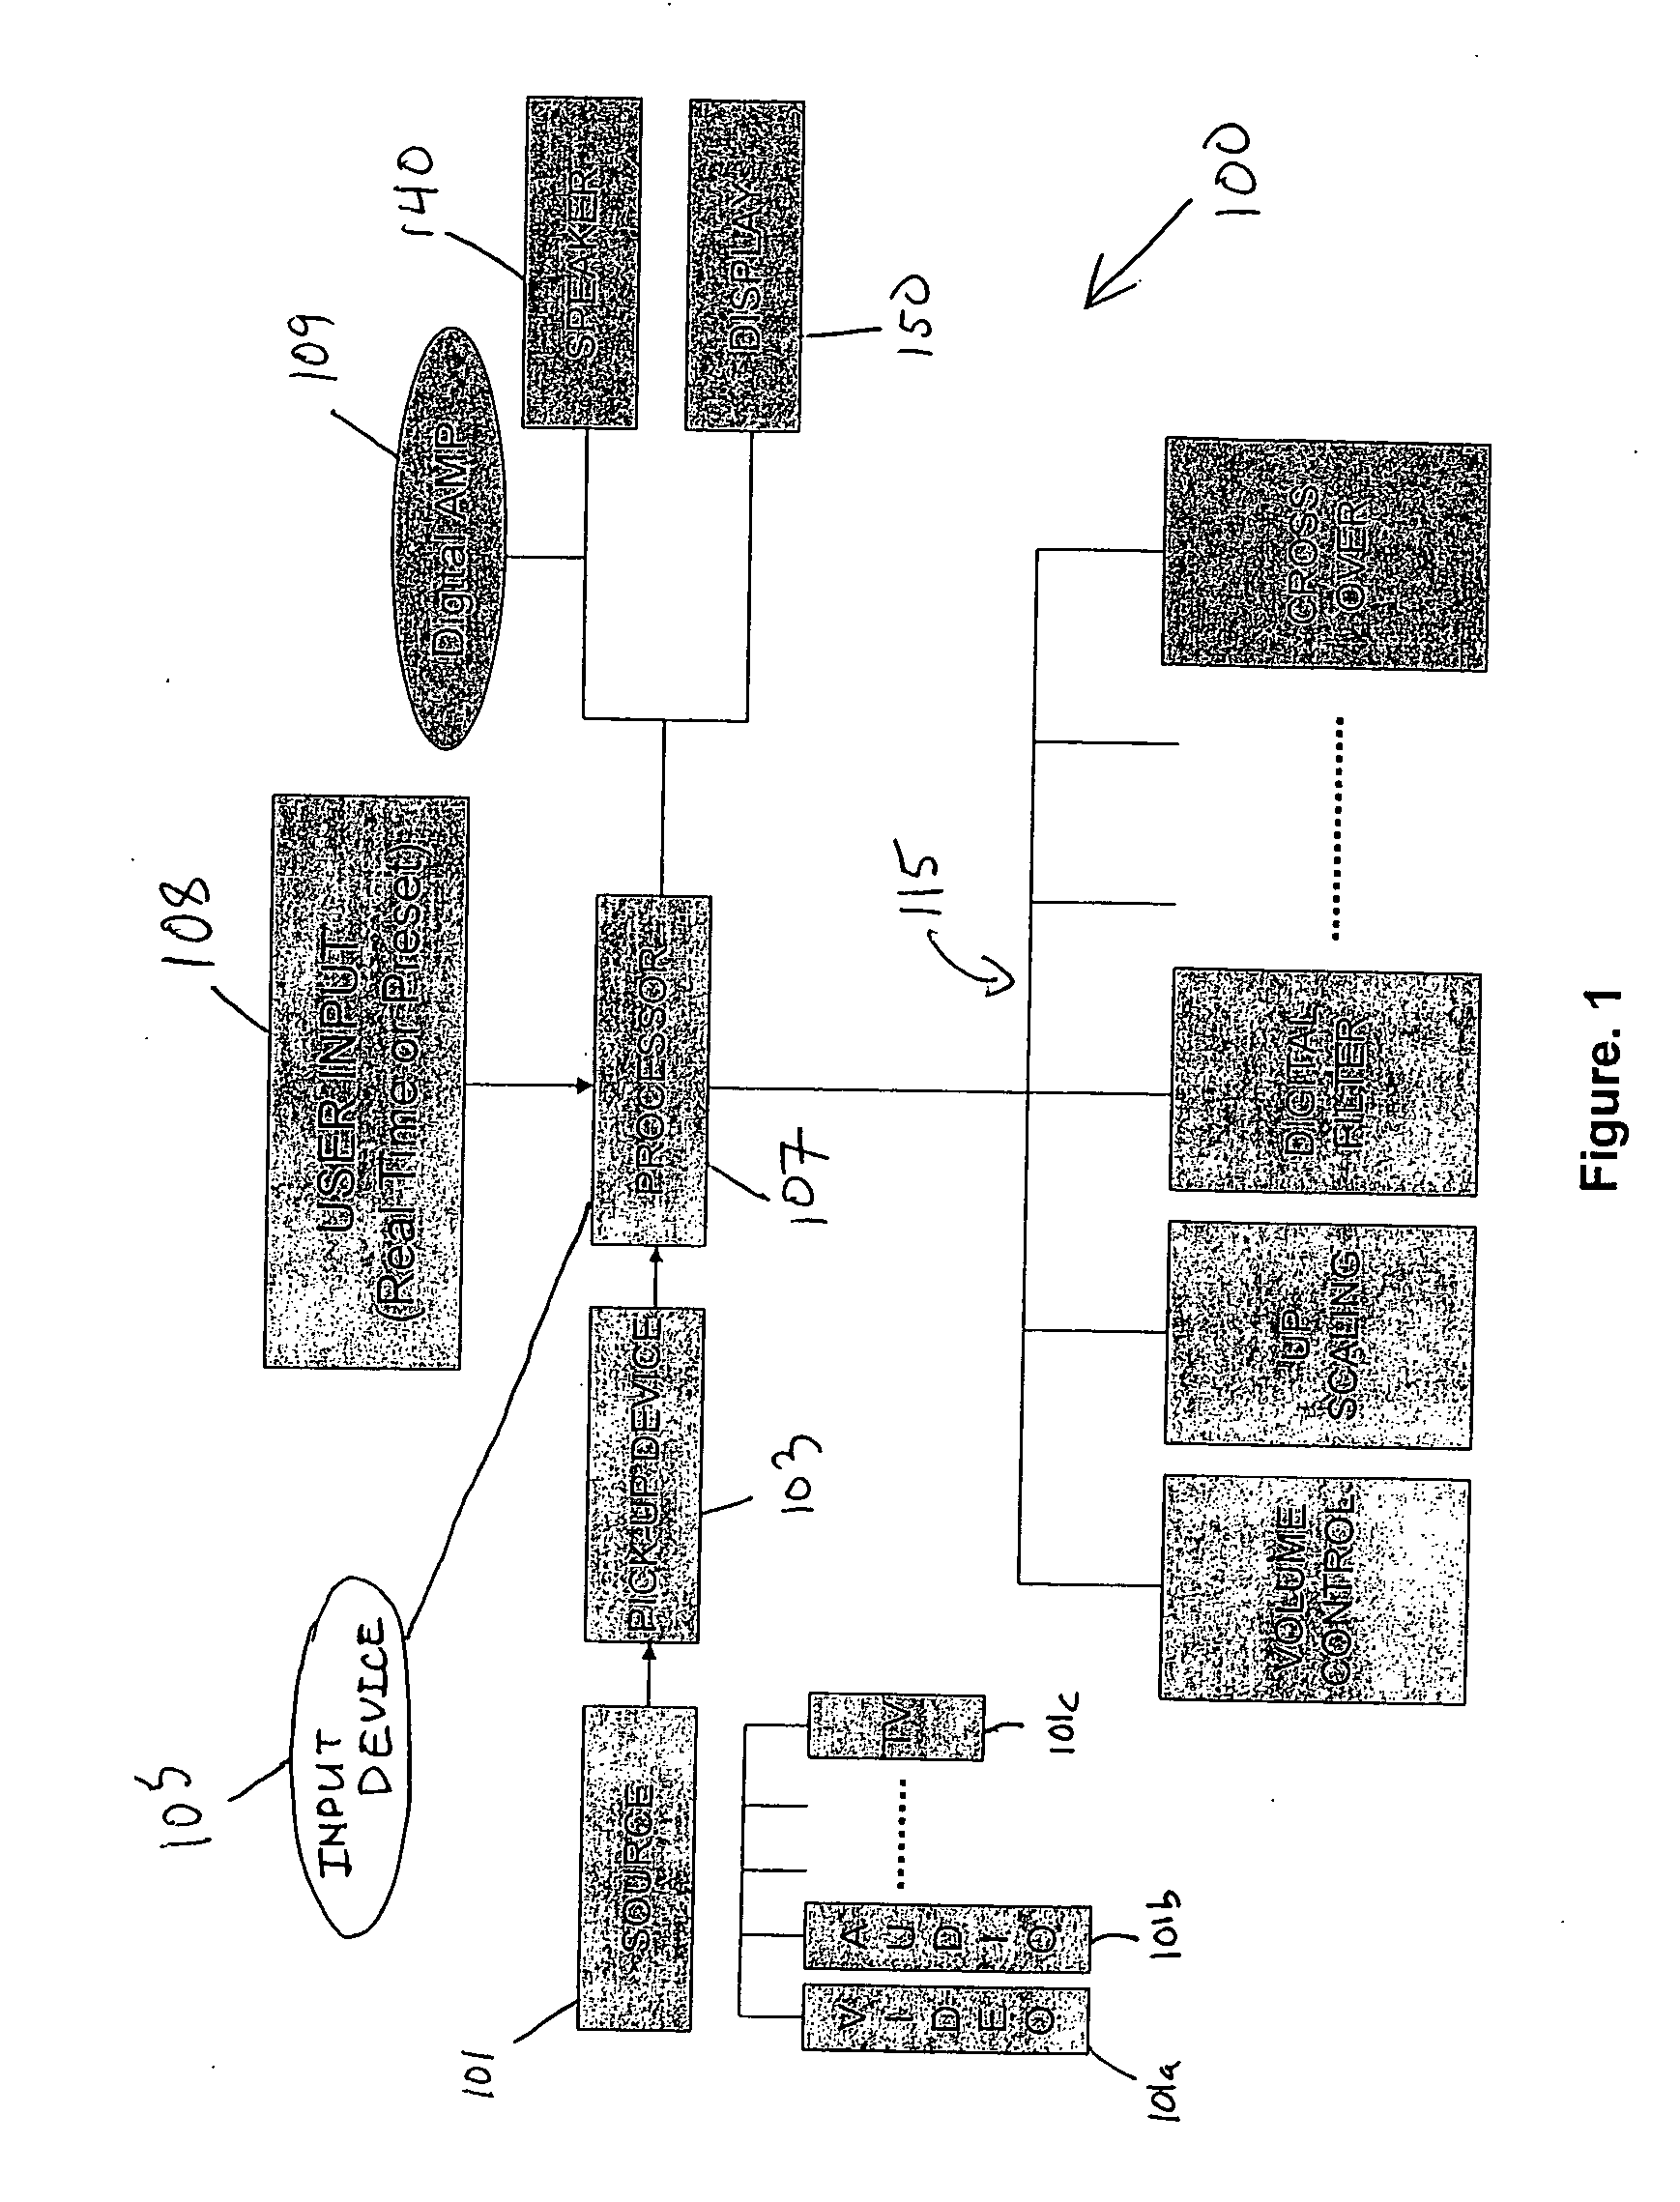 Integrated multimedia signal processing system using centralized processing of signals